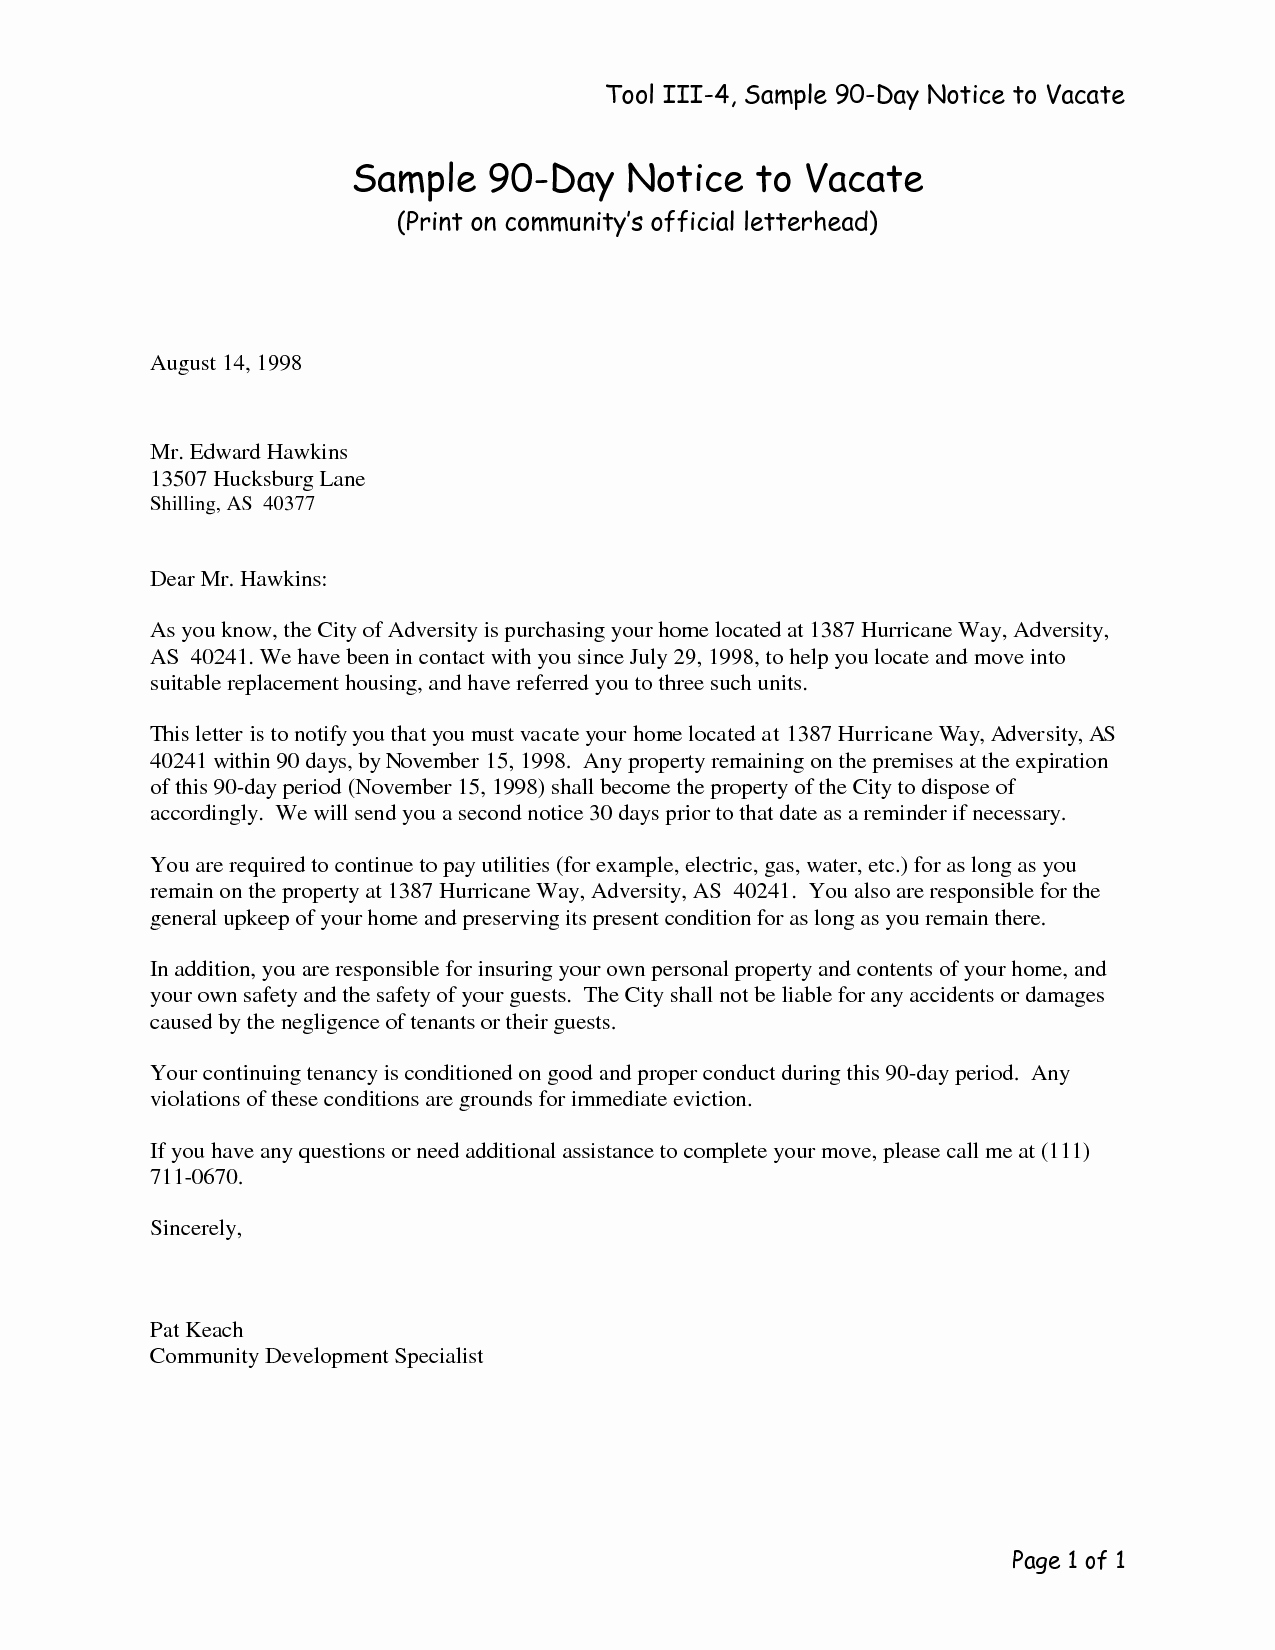 Letter to Tenant to Vacate Beautiful Free Printable Intent to Vacate Letter Template Vacate